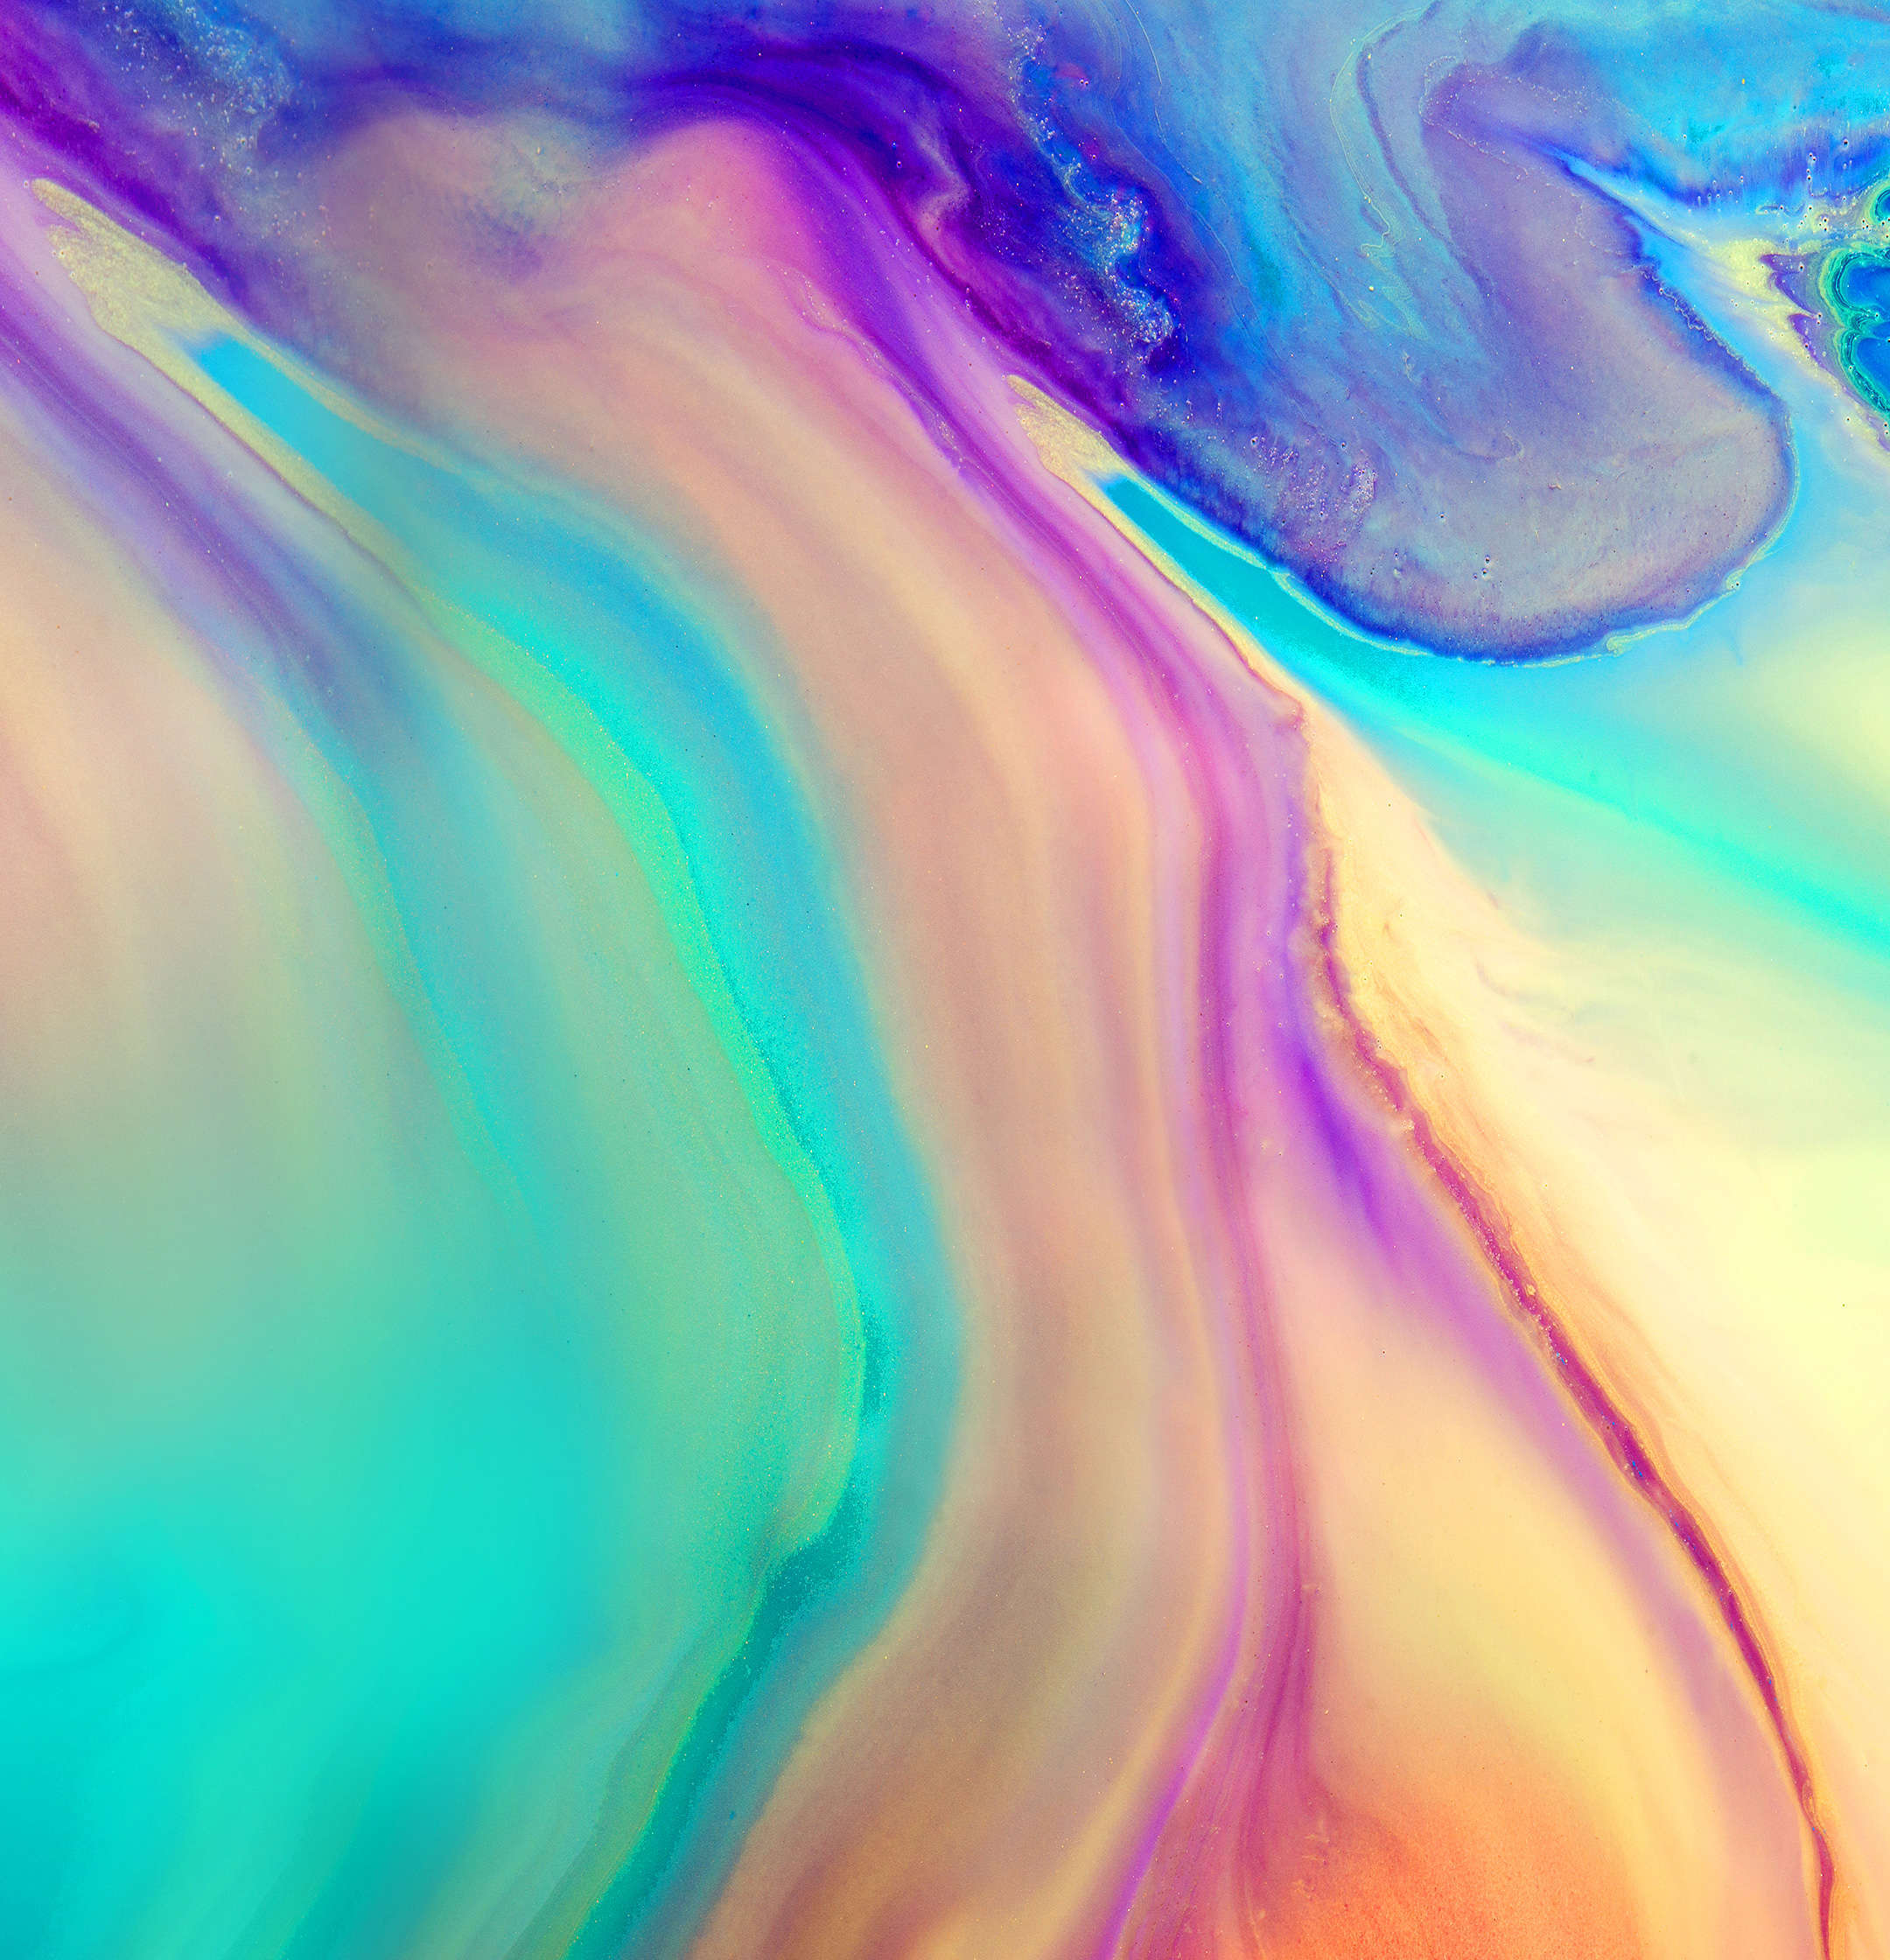 Download Huawei P20 Pro Wallpapers (Updated) - DroidViews